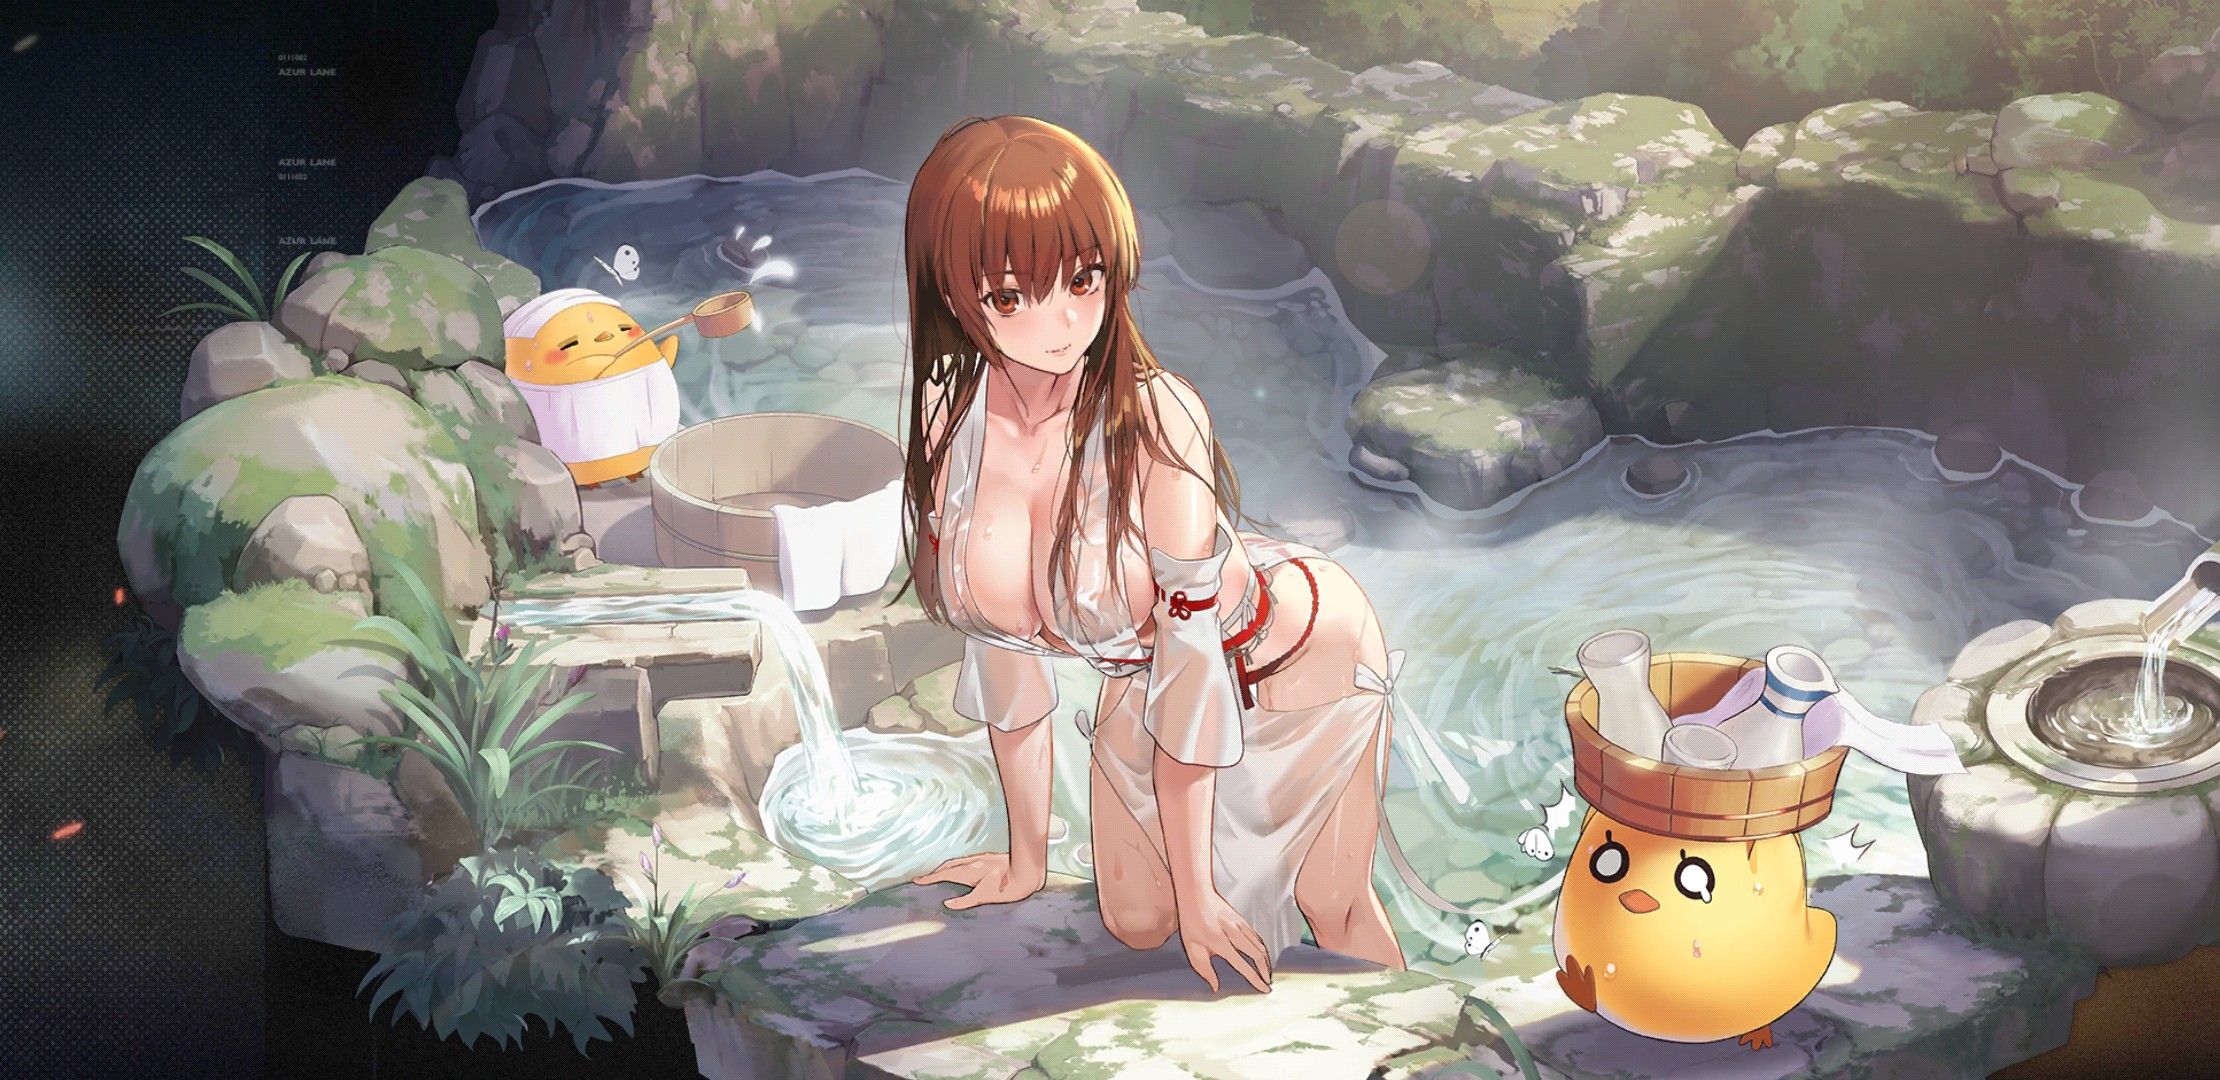 【There is an image】 Smartphone that urges charging with erotic swimsuits is malicious 11